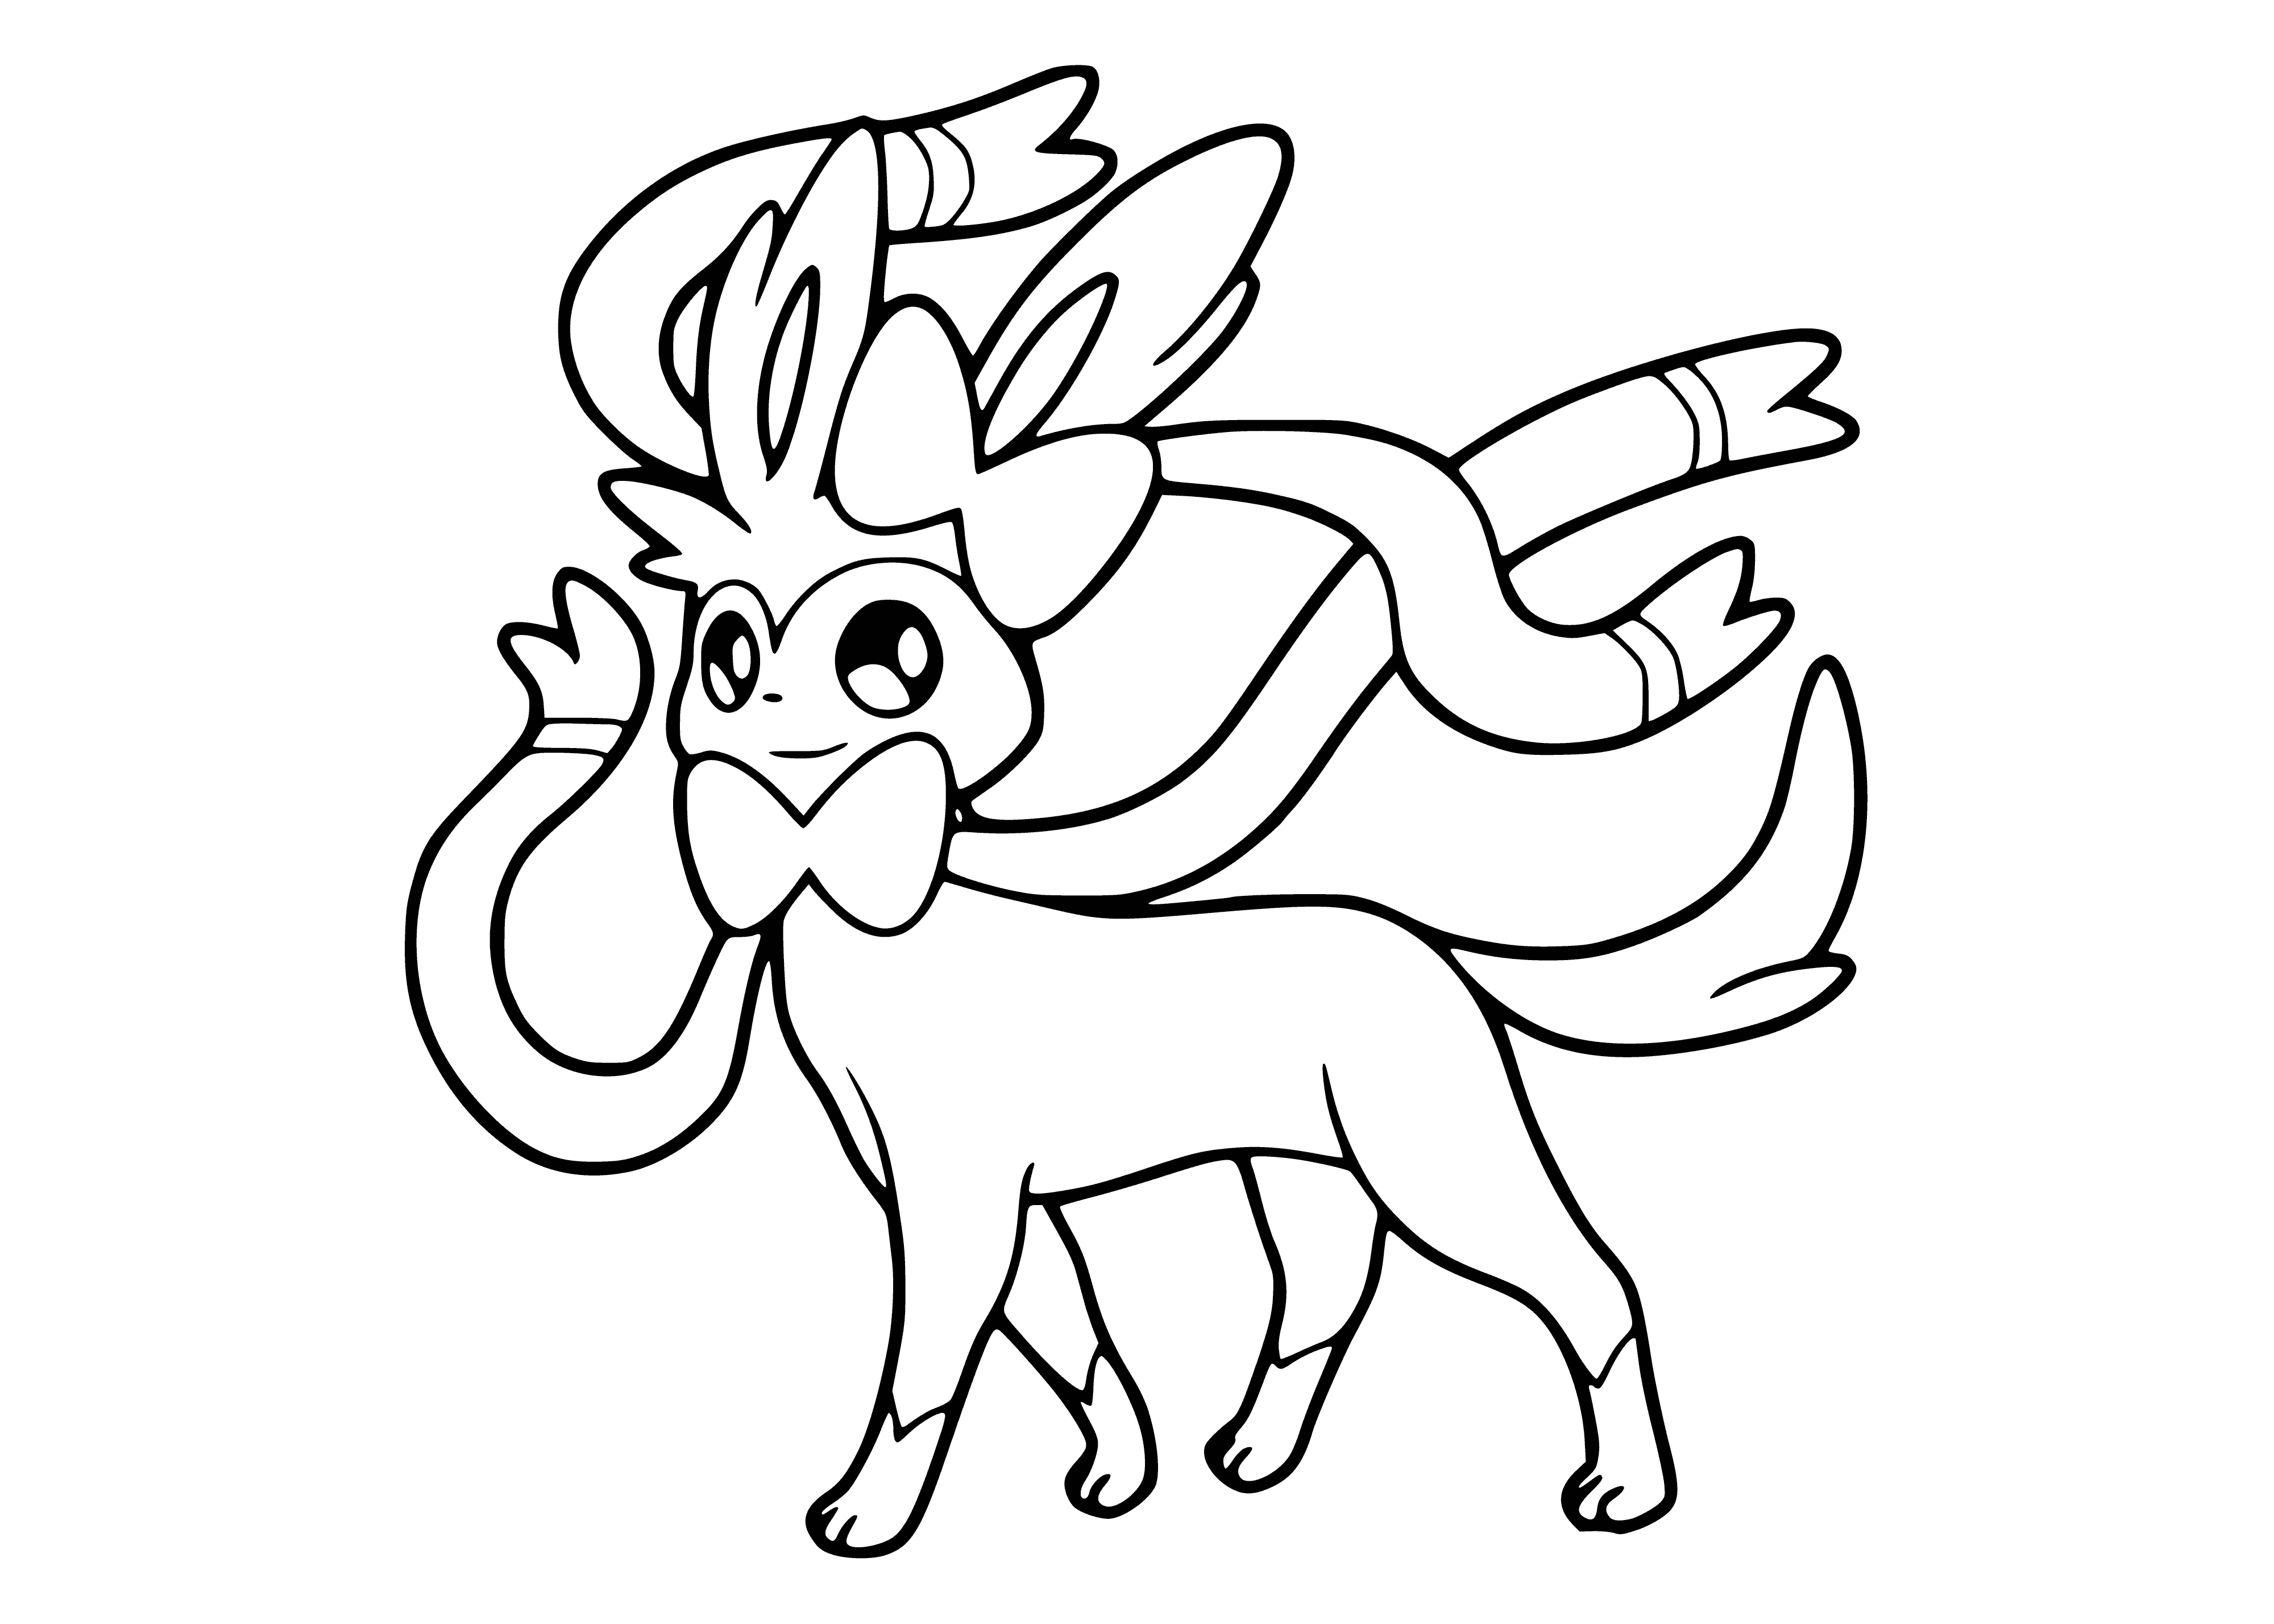 coloring page: Sylveon is an evolution of Eevee, with big eyes, blue fur and 6 furry tails. Has small head and long neck topped with a pink bow.